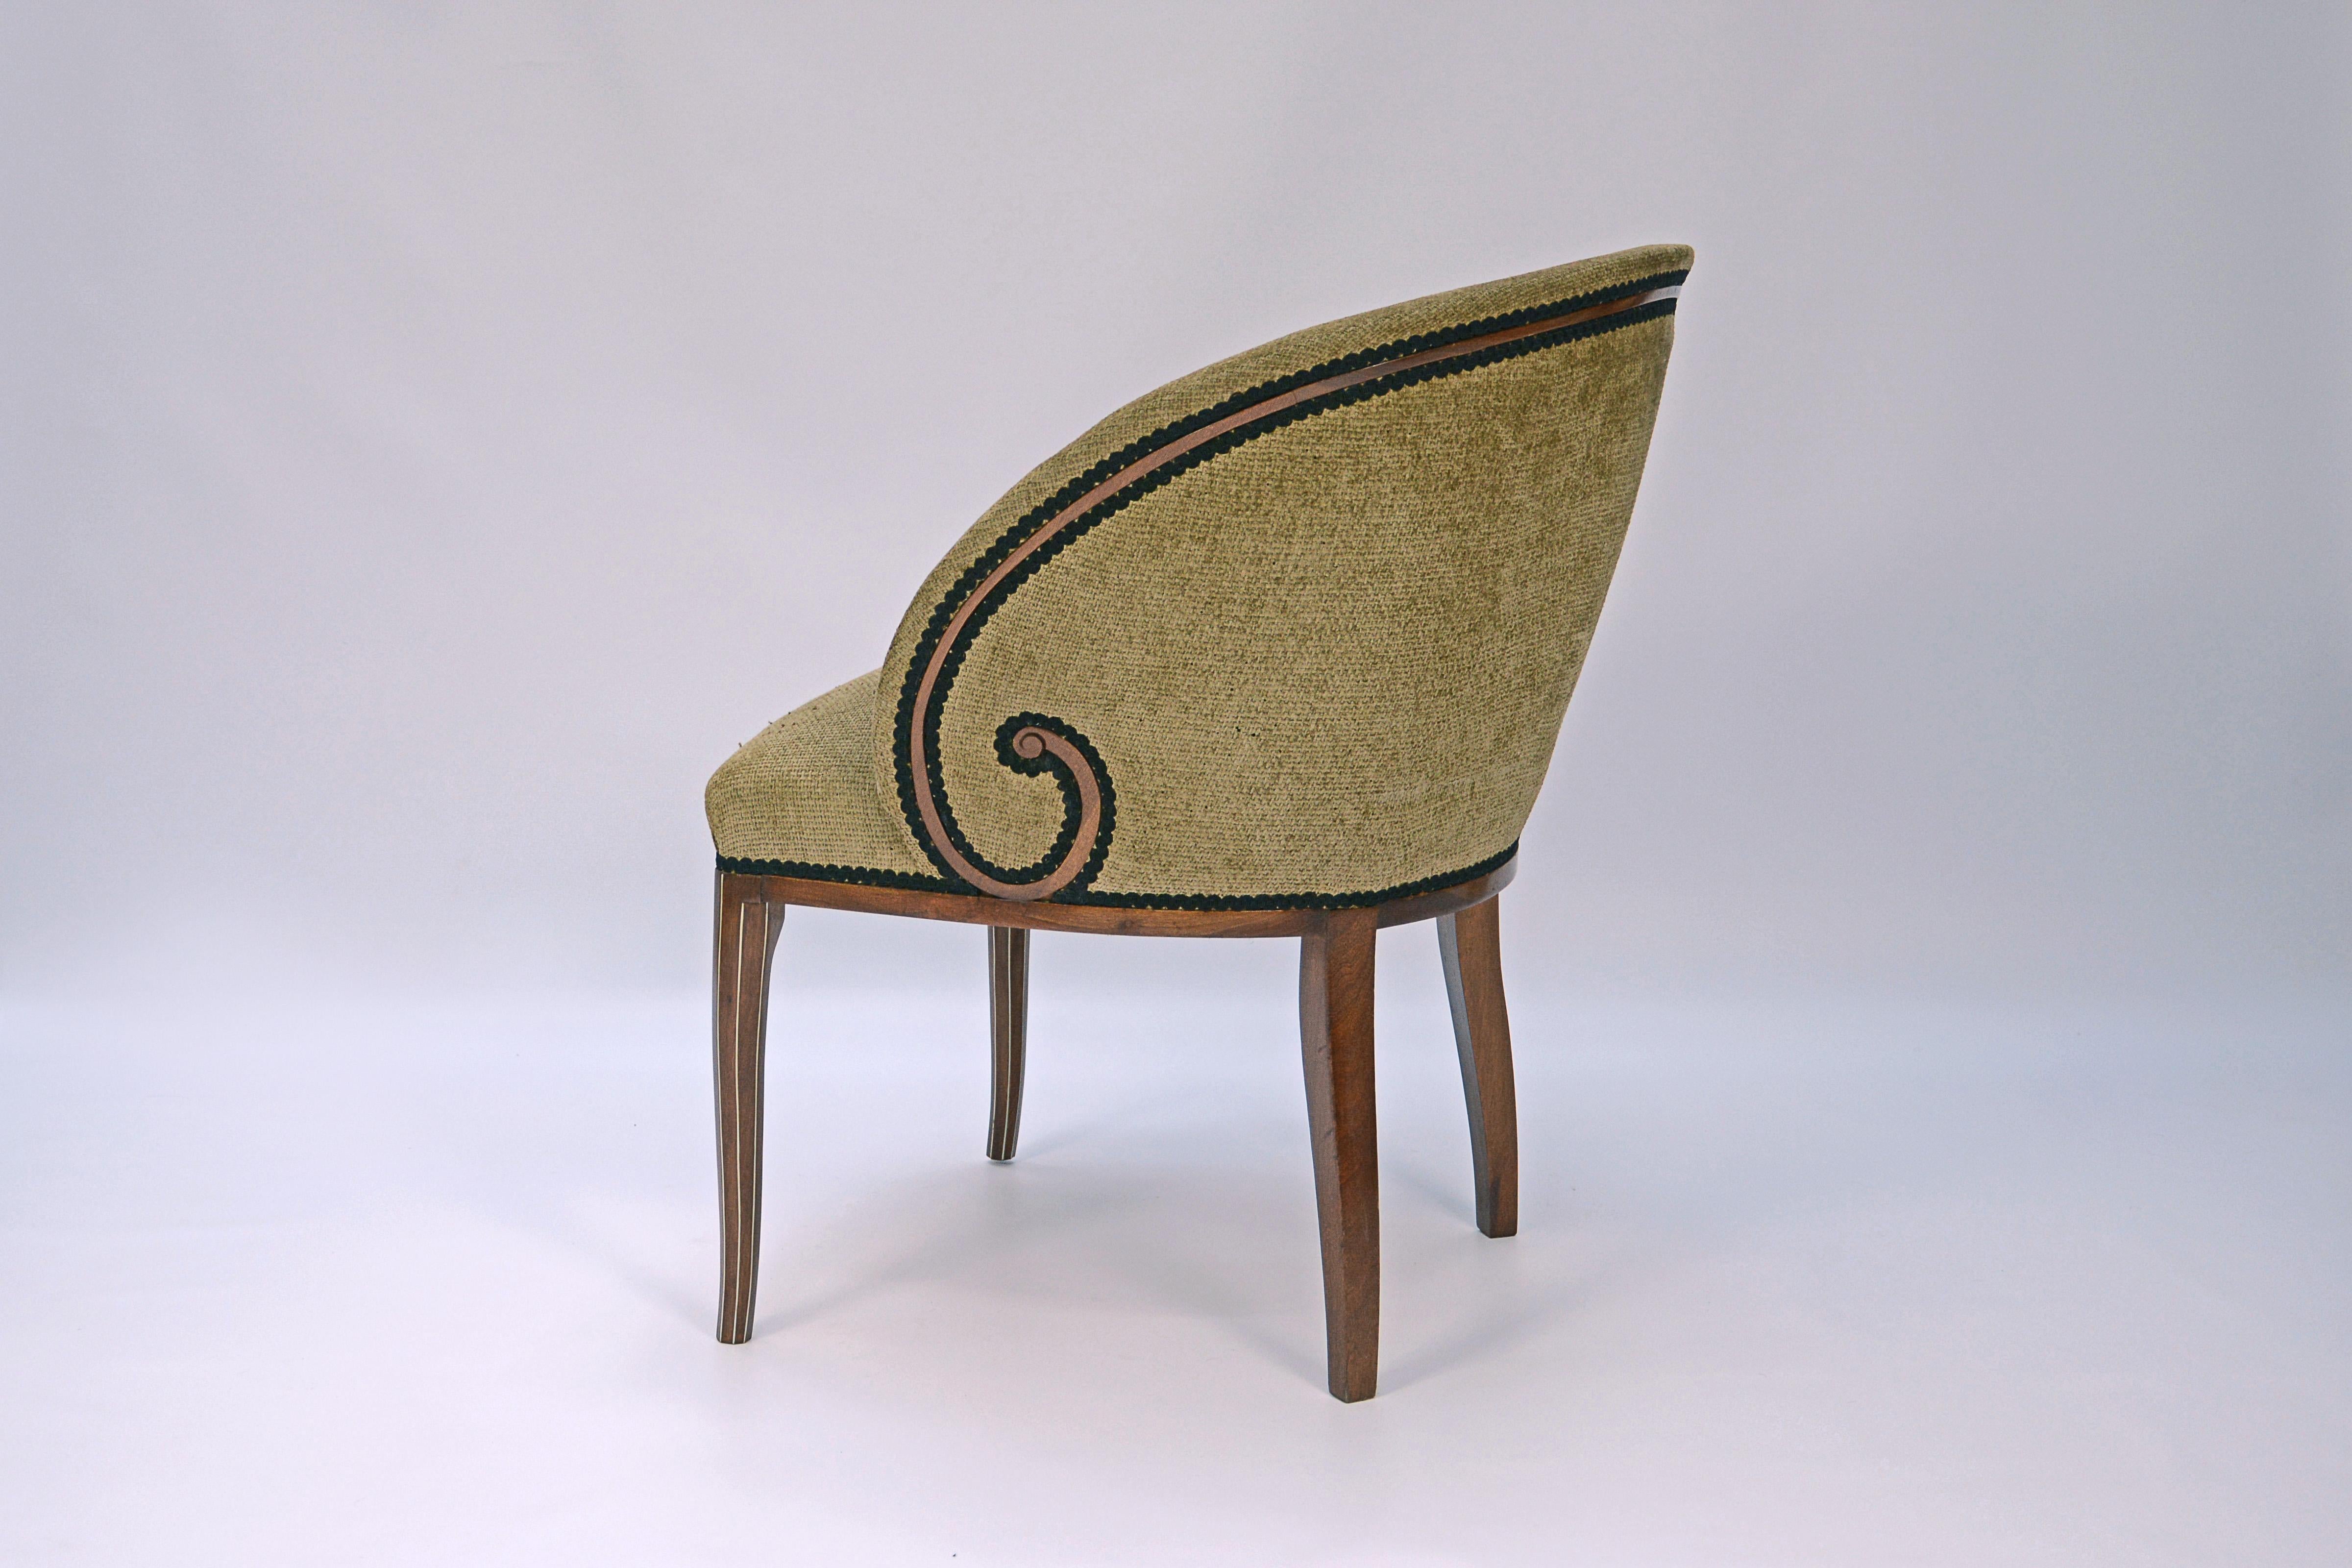 Set of 12 chairs designed by Jules Leleu (1883-1961). Walnut wood with inlay and chenille upholstery.

Francoise Sirex (2008) 